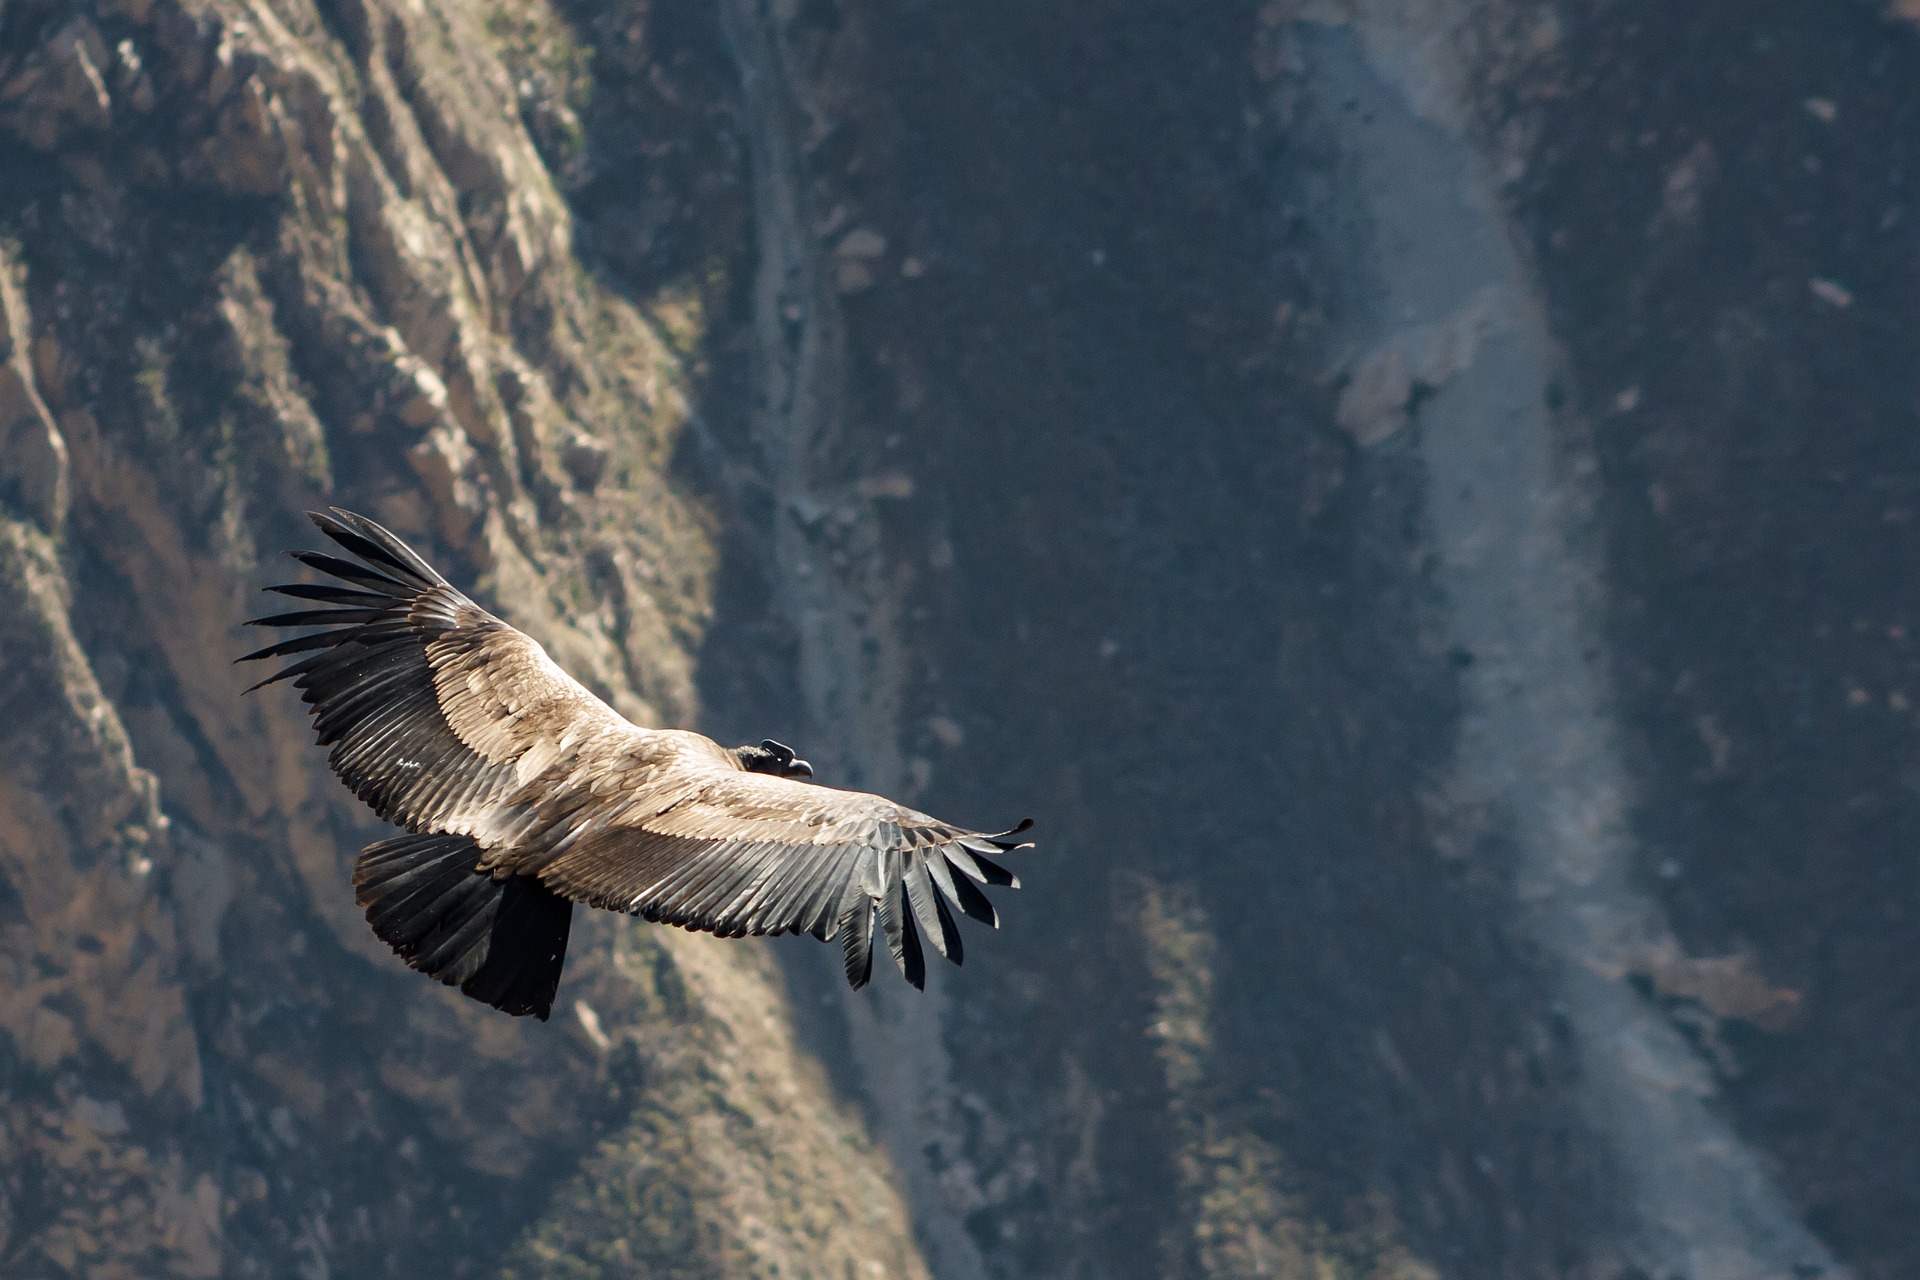 The Andean condor in flight - recording devices revealed it actually flaps its wings for just one per cent of its flight time.